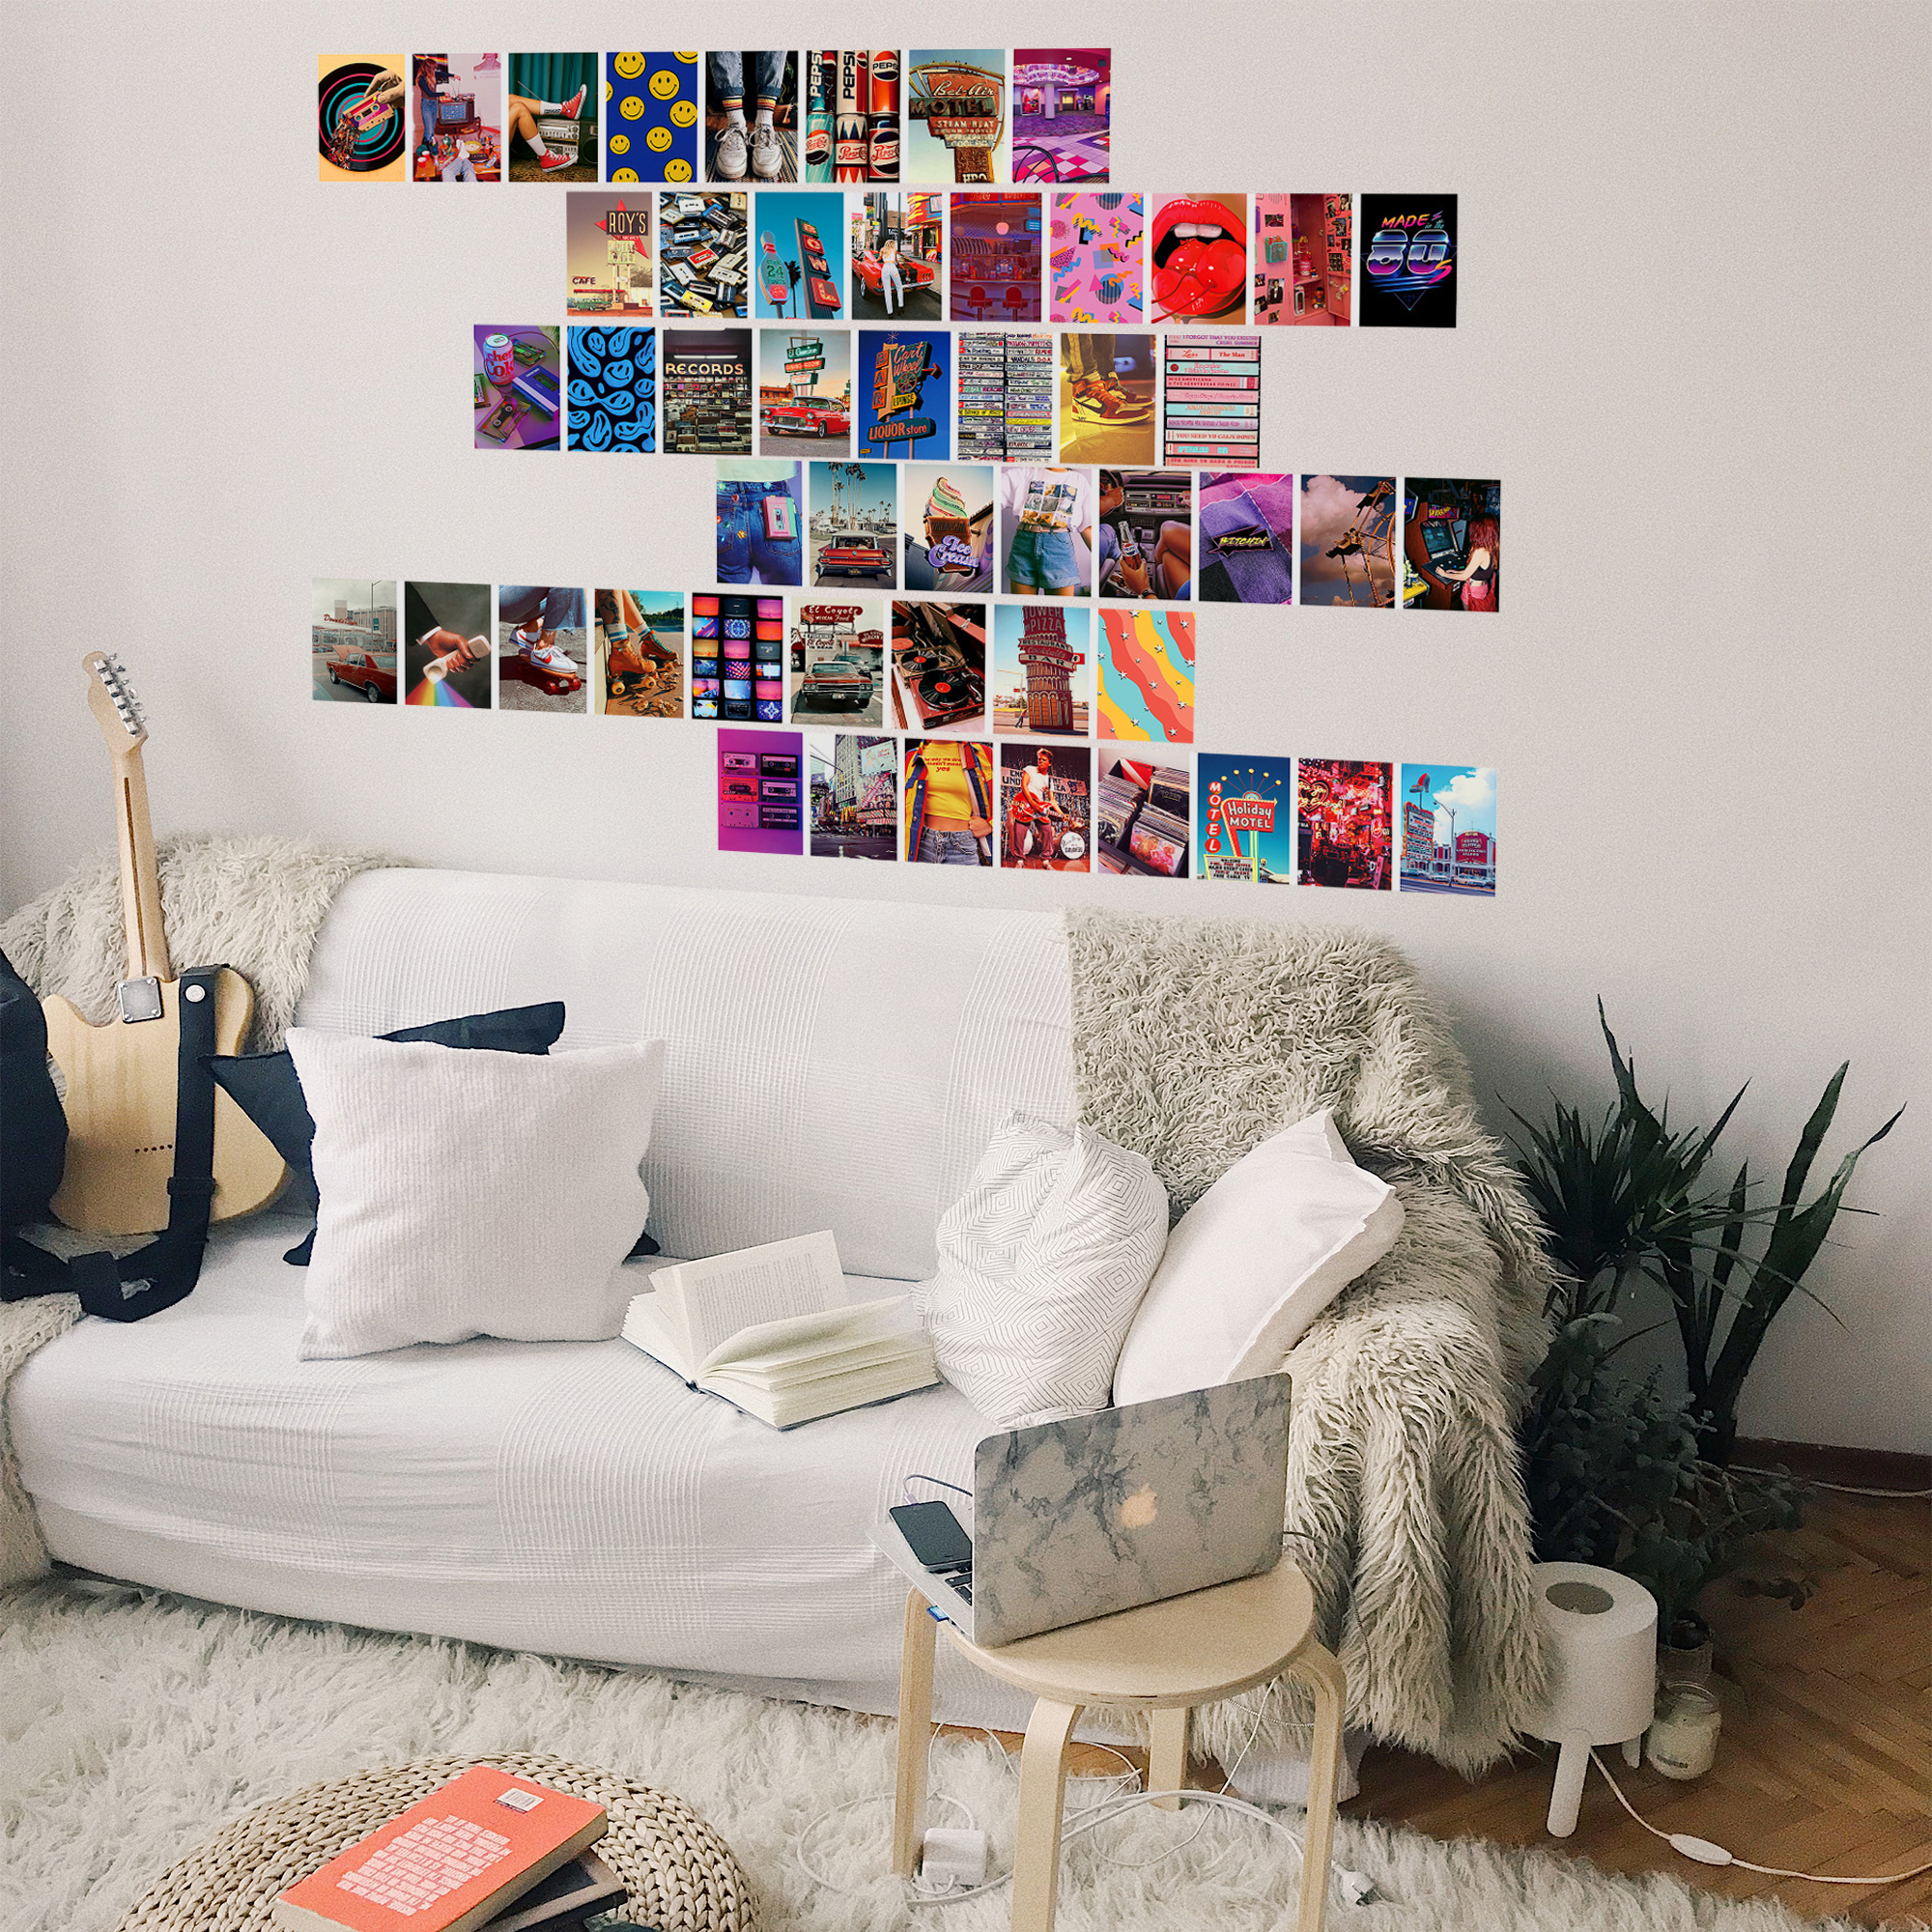 EZbuy Wall Collage Kit, Aesthetic Room Decor for Teen Girls, Cottagecore Wall  Decor for Bedroom, Botanical Wall Art, Double-sided Printing Poster with  Glue Dots Sheet, 50 Retro Pictures Set 4x6 inch